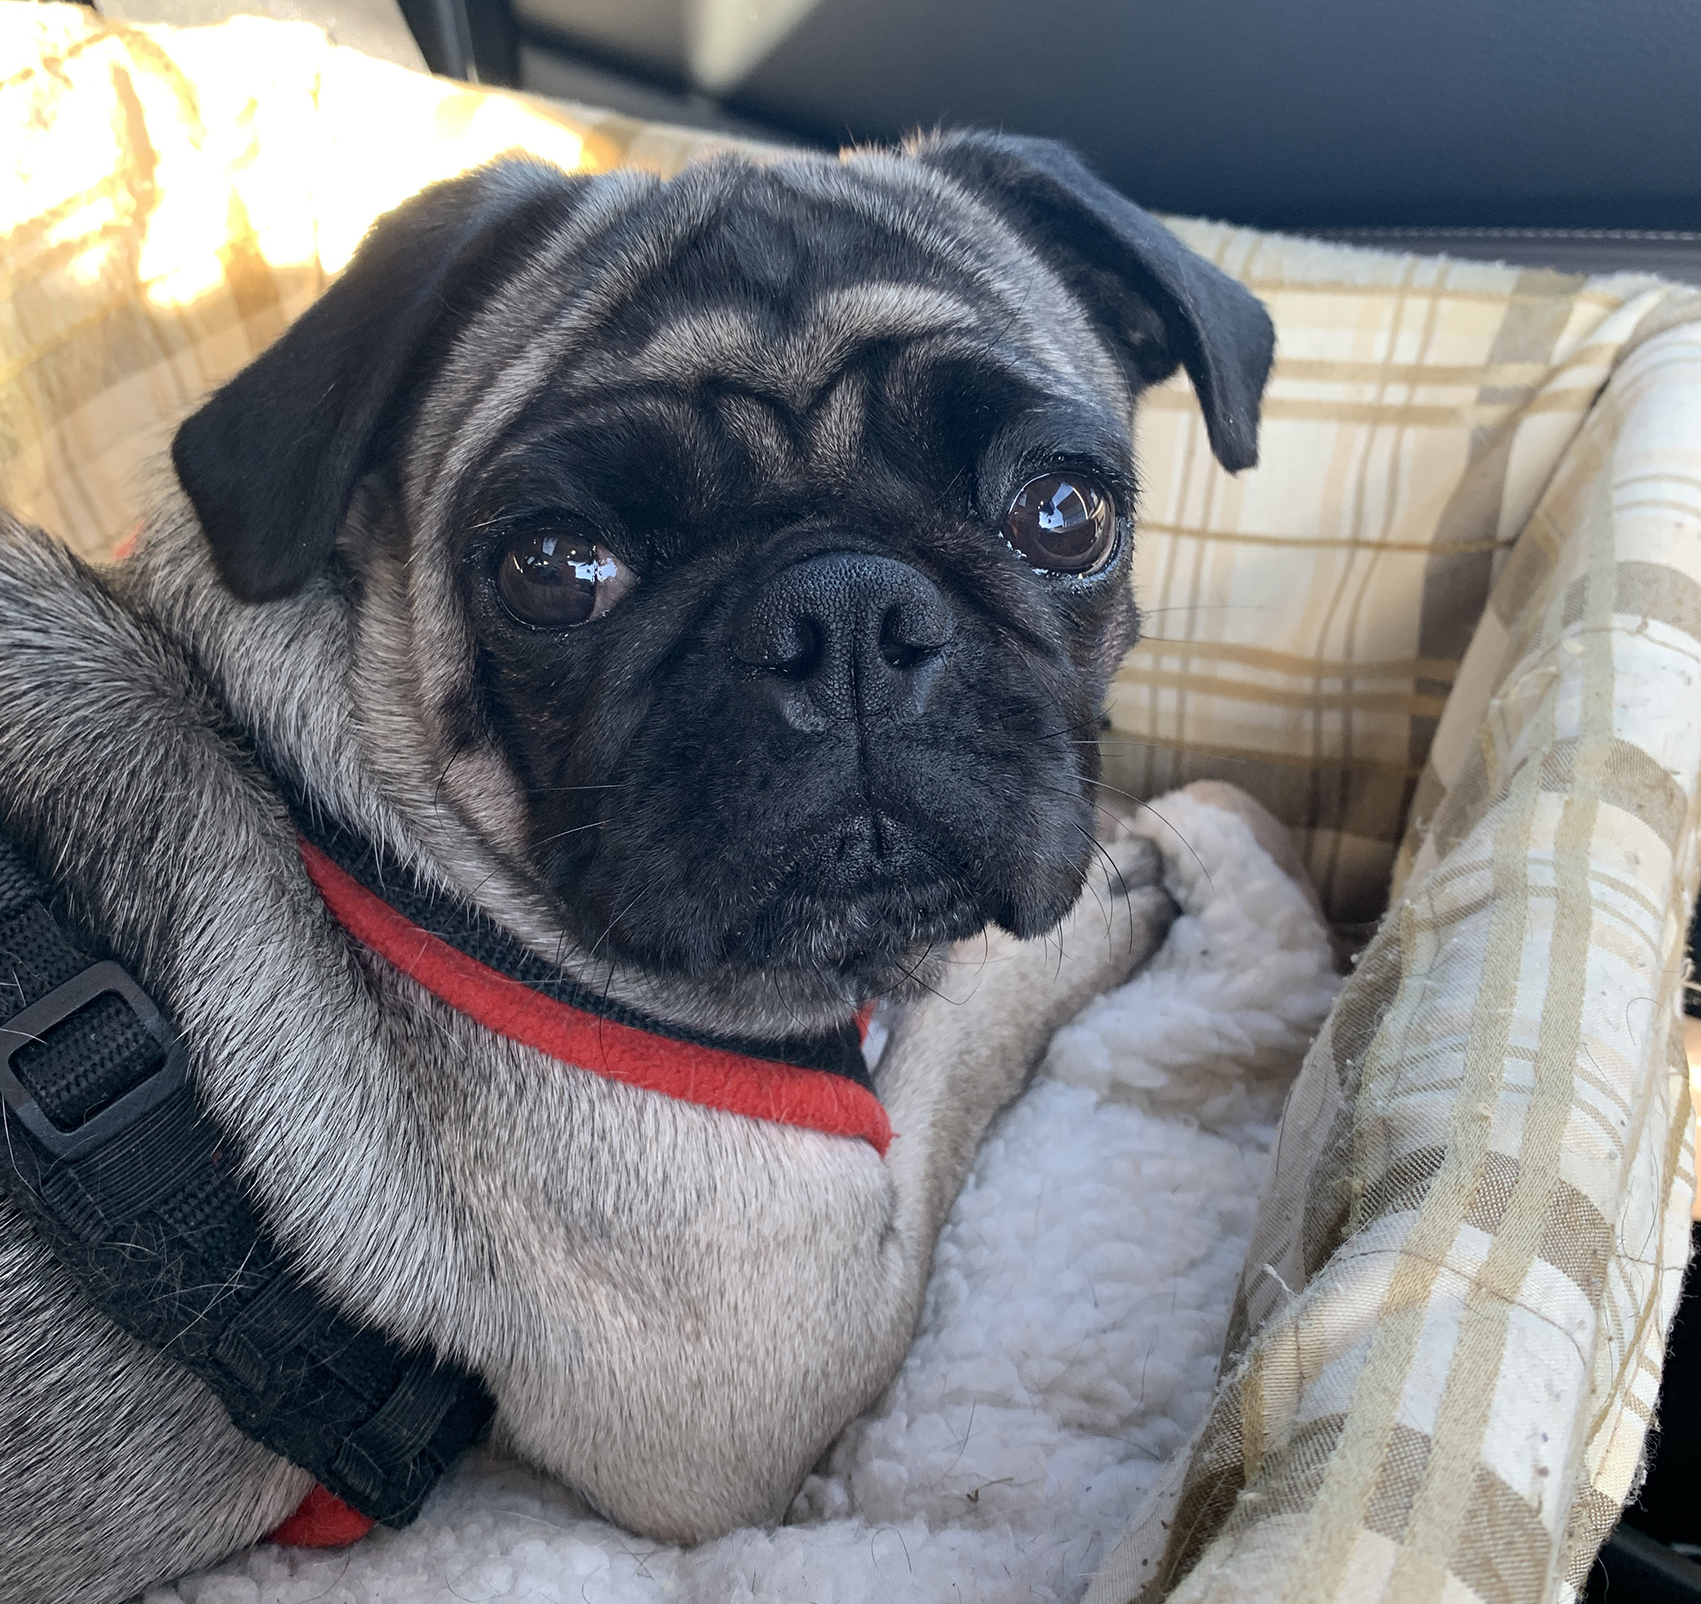 Adoption for Chuggs - image Wilma on https://pugprotectiontrust.org